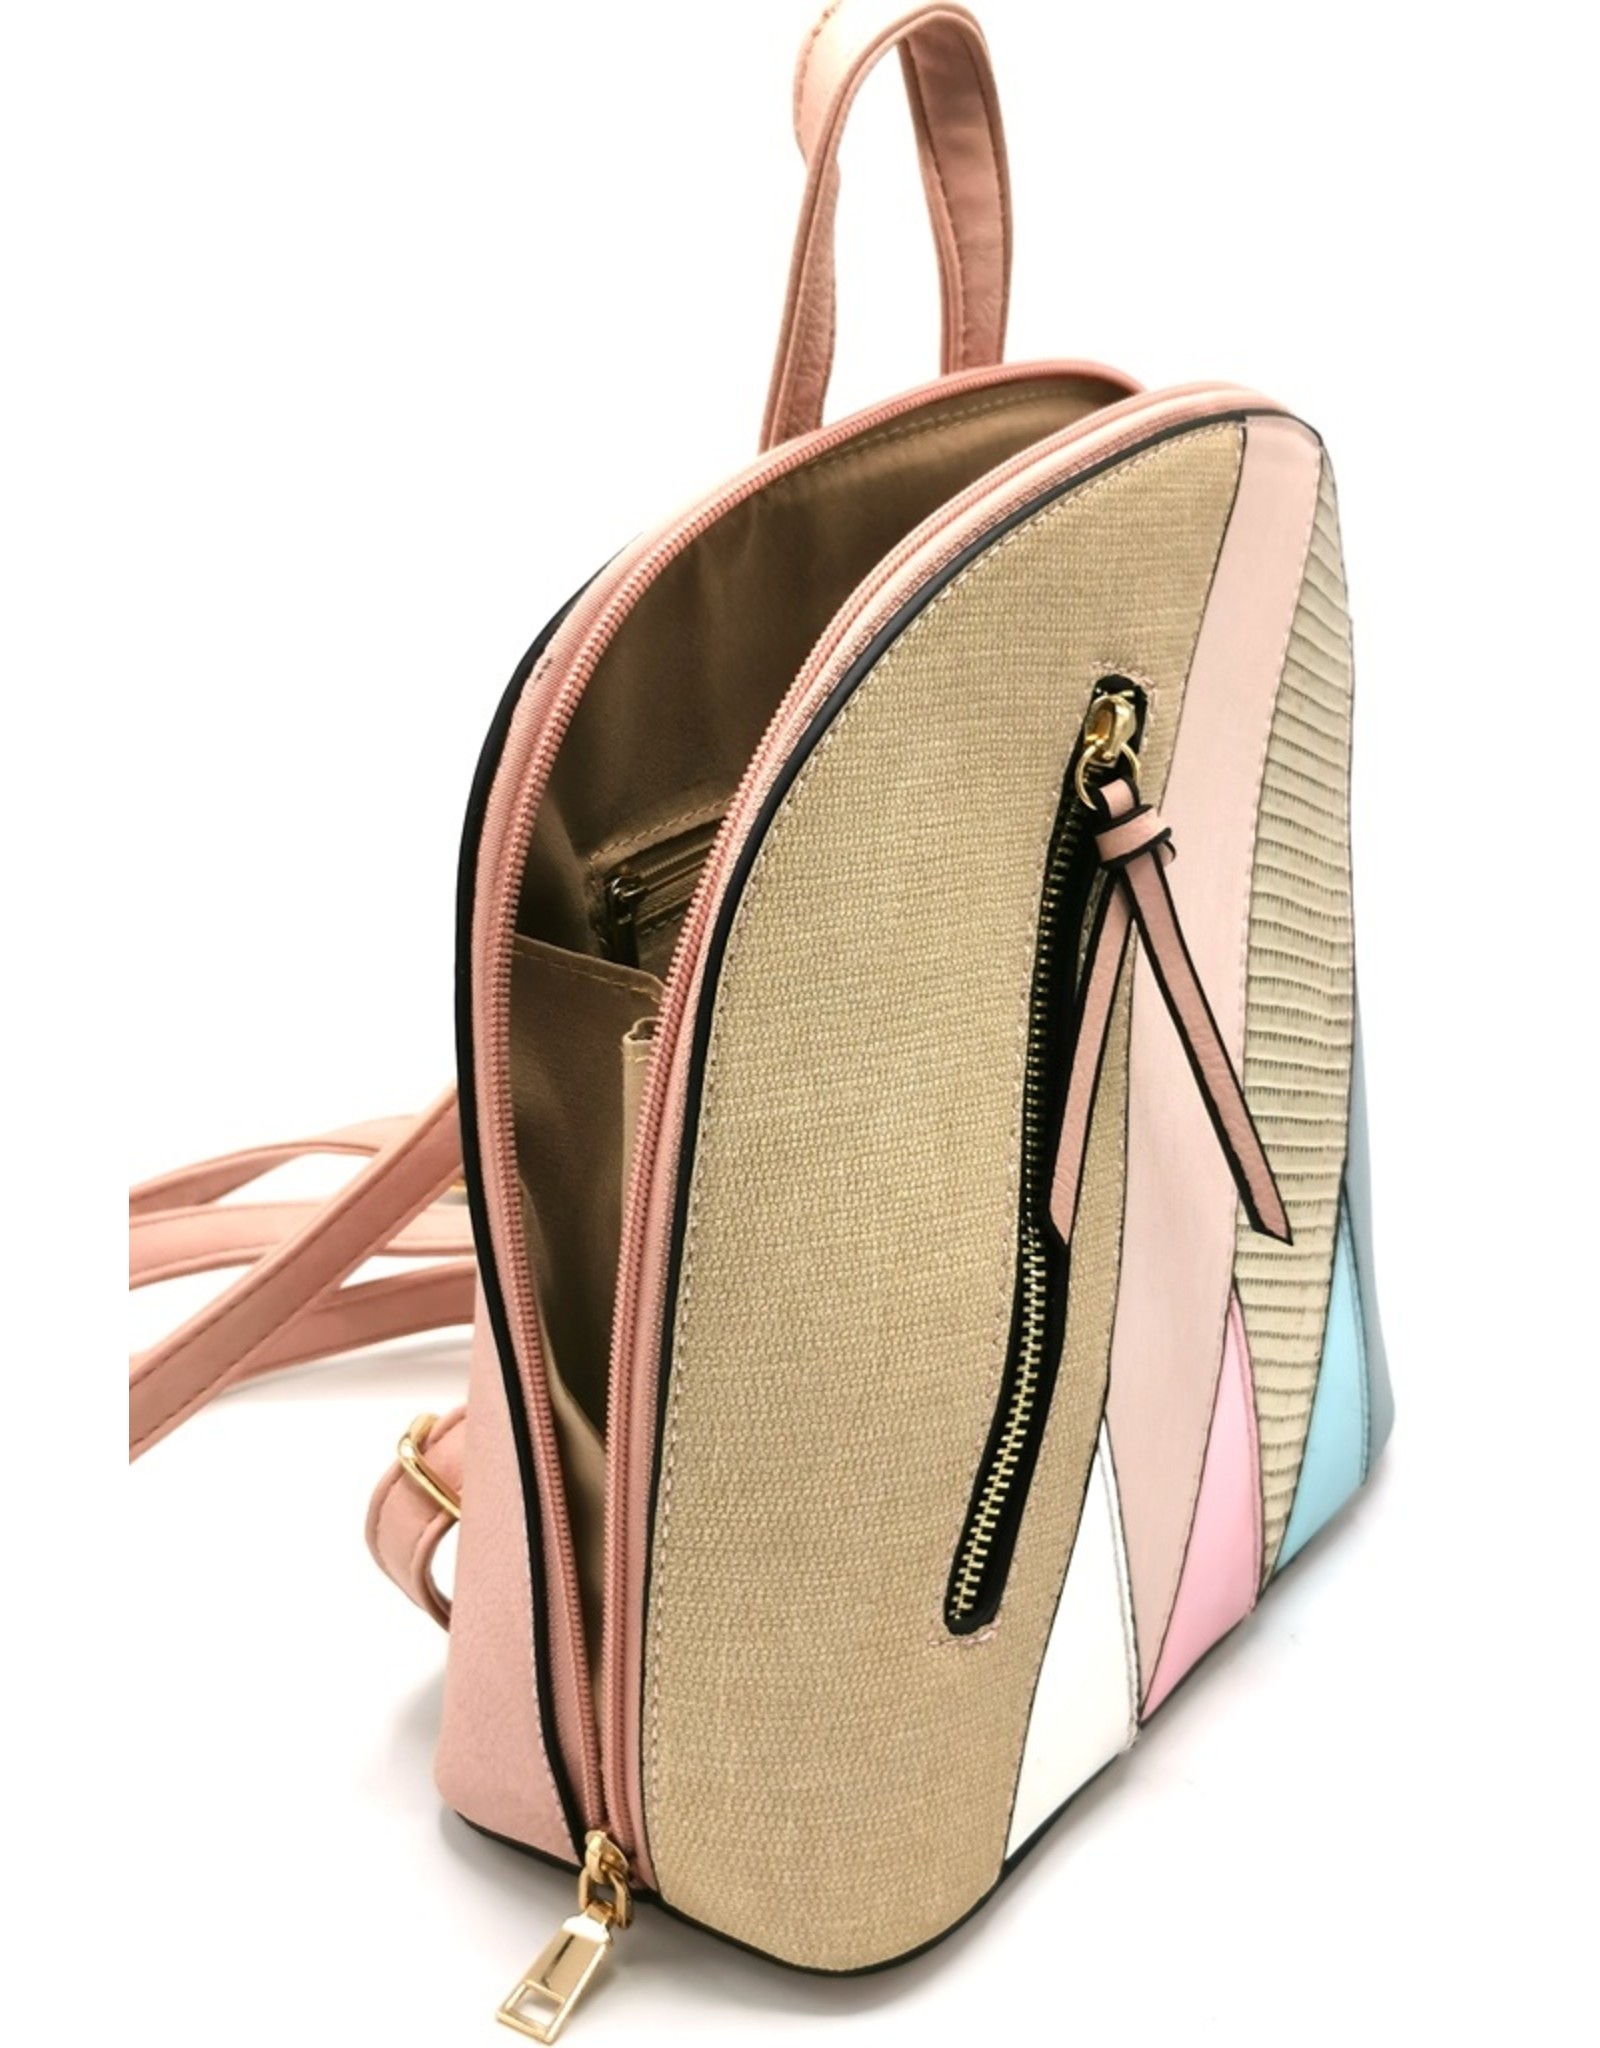 Trukado Backpacks - Fashion backpack with holographic accents